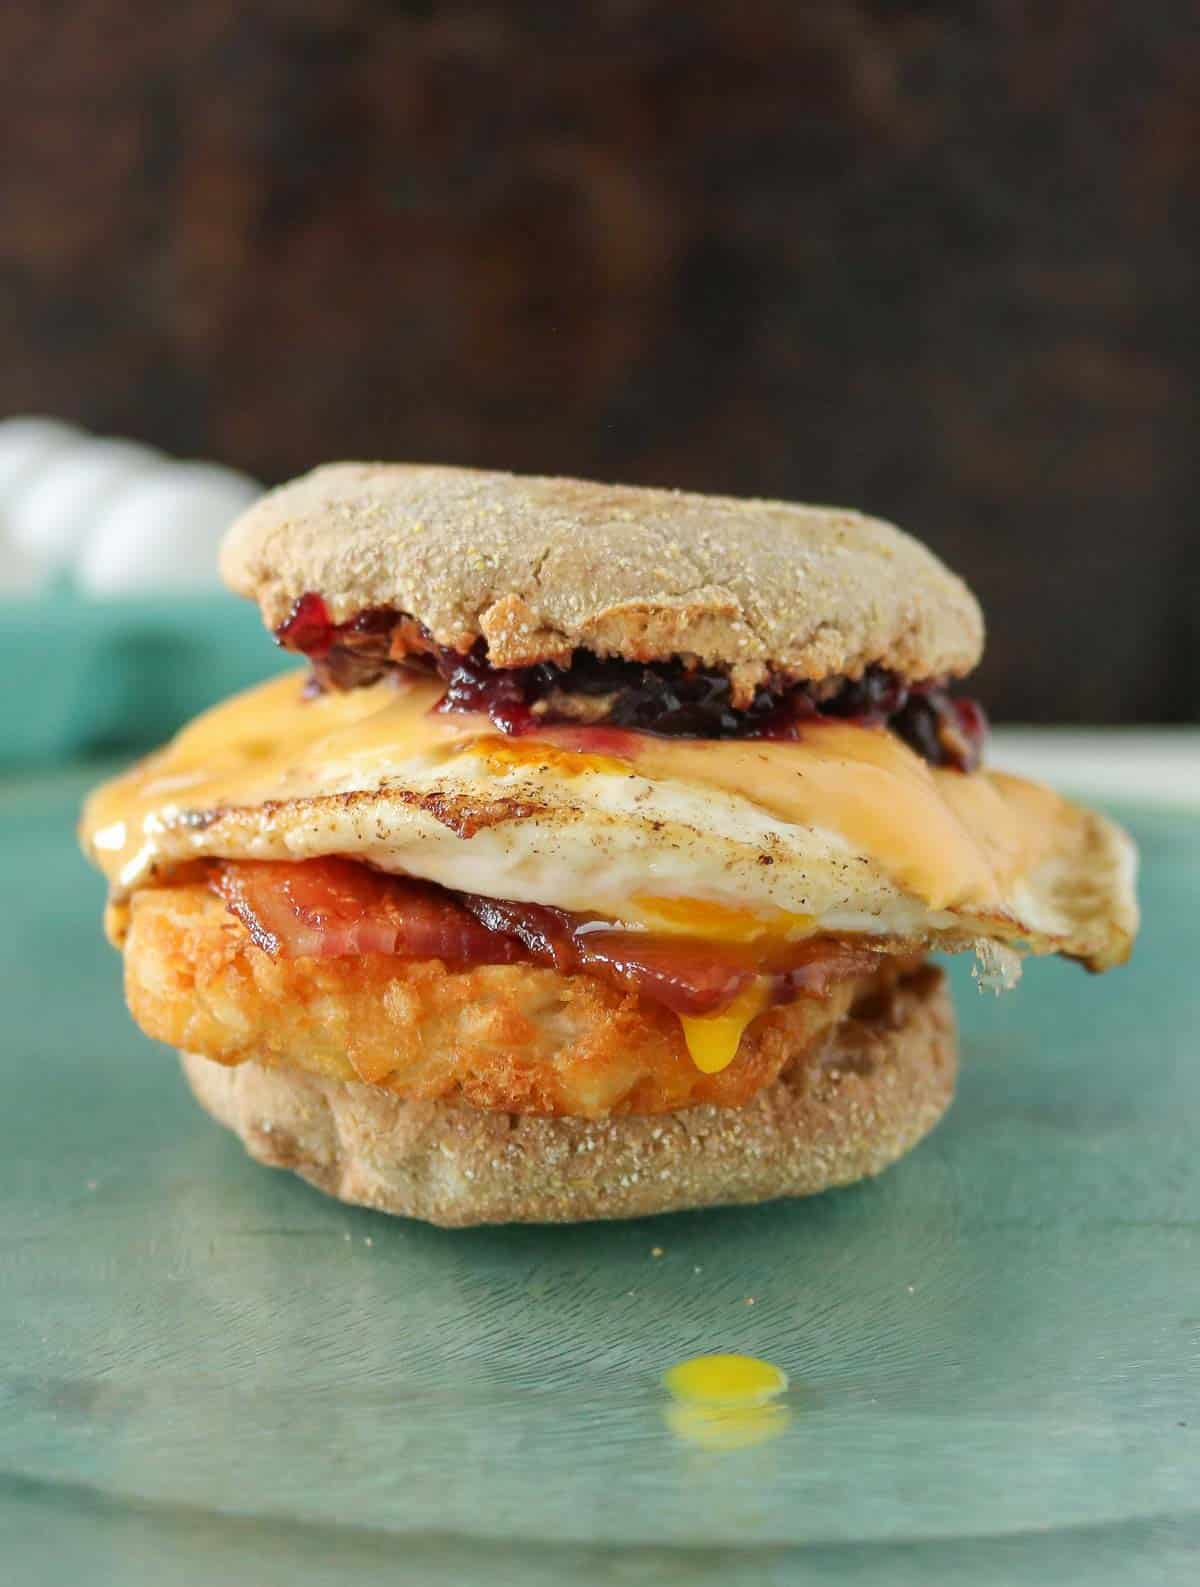 Bacon and egg hash brown breakfast sandwich.